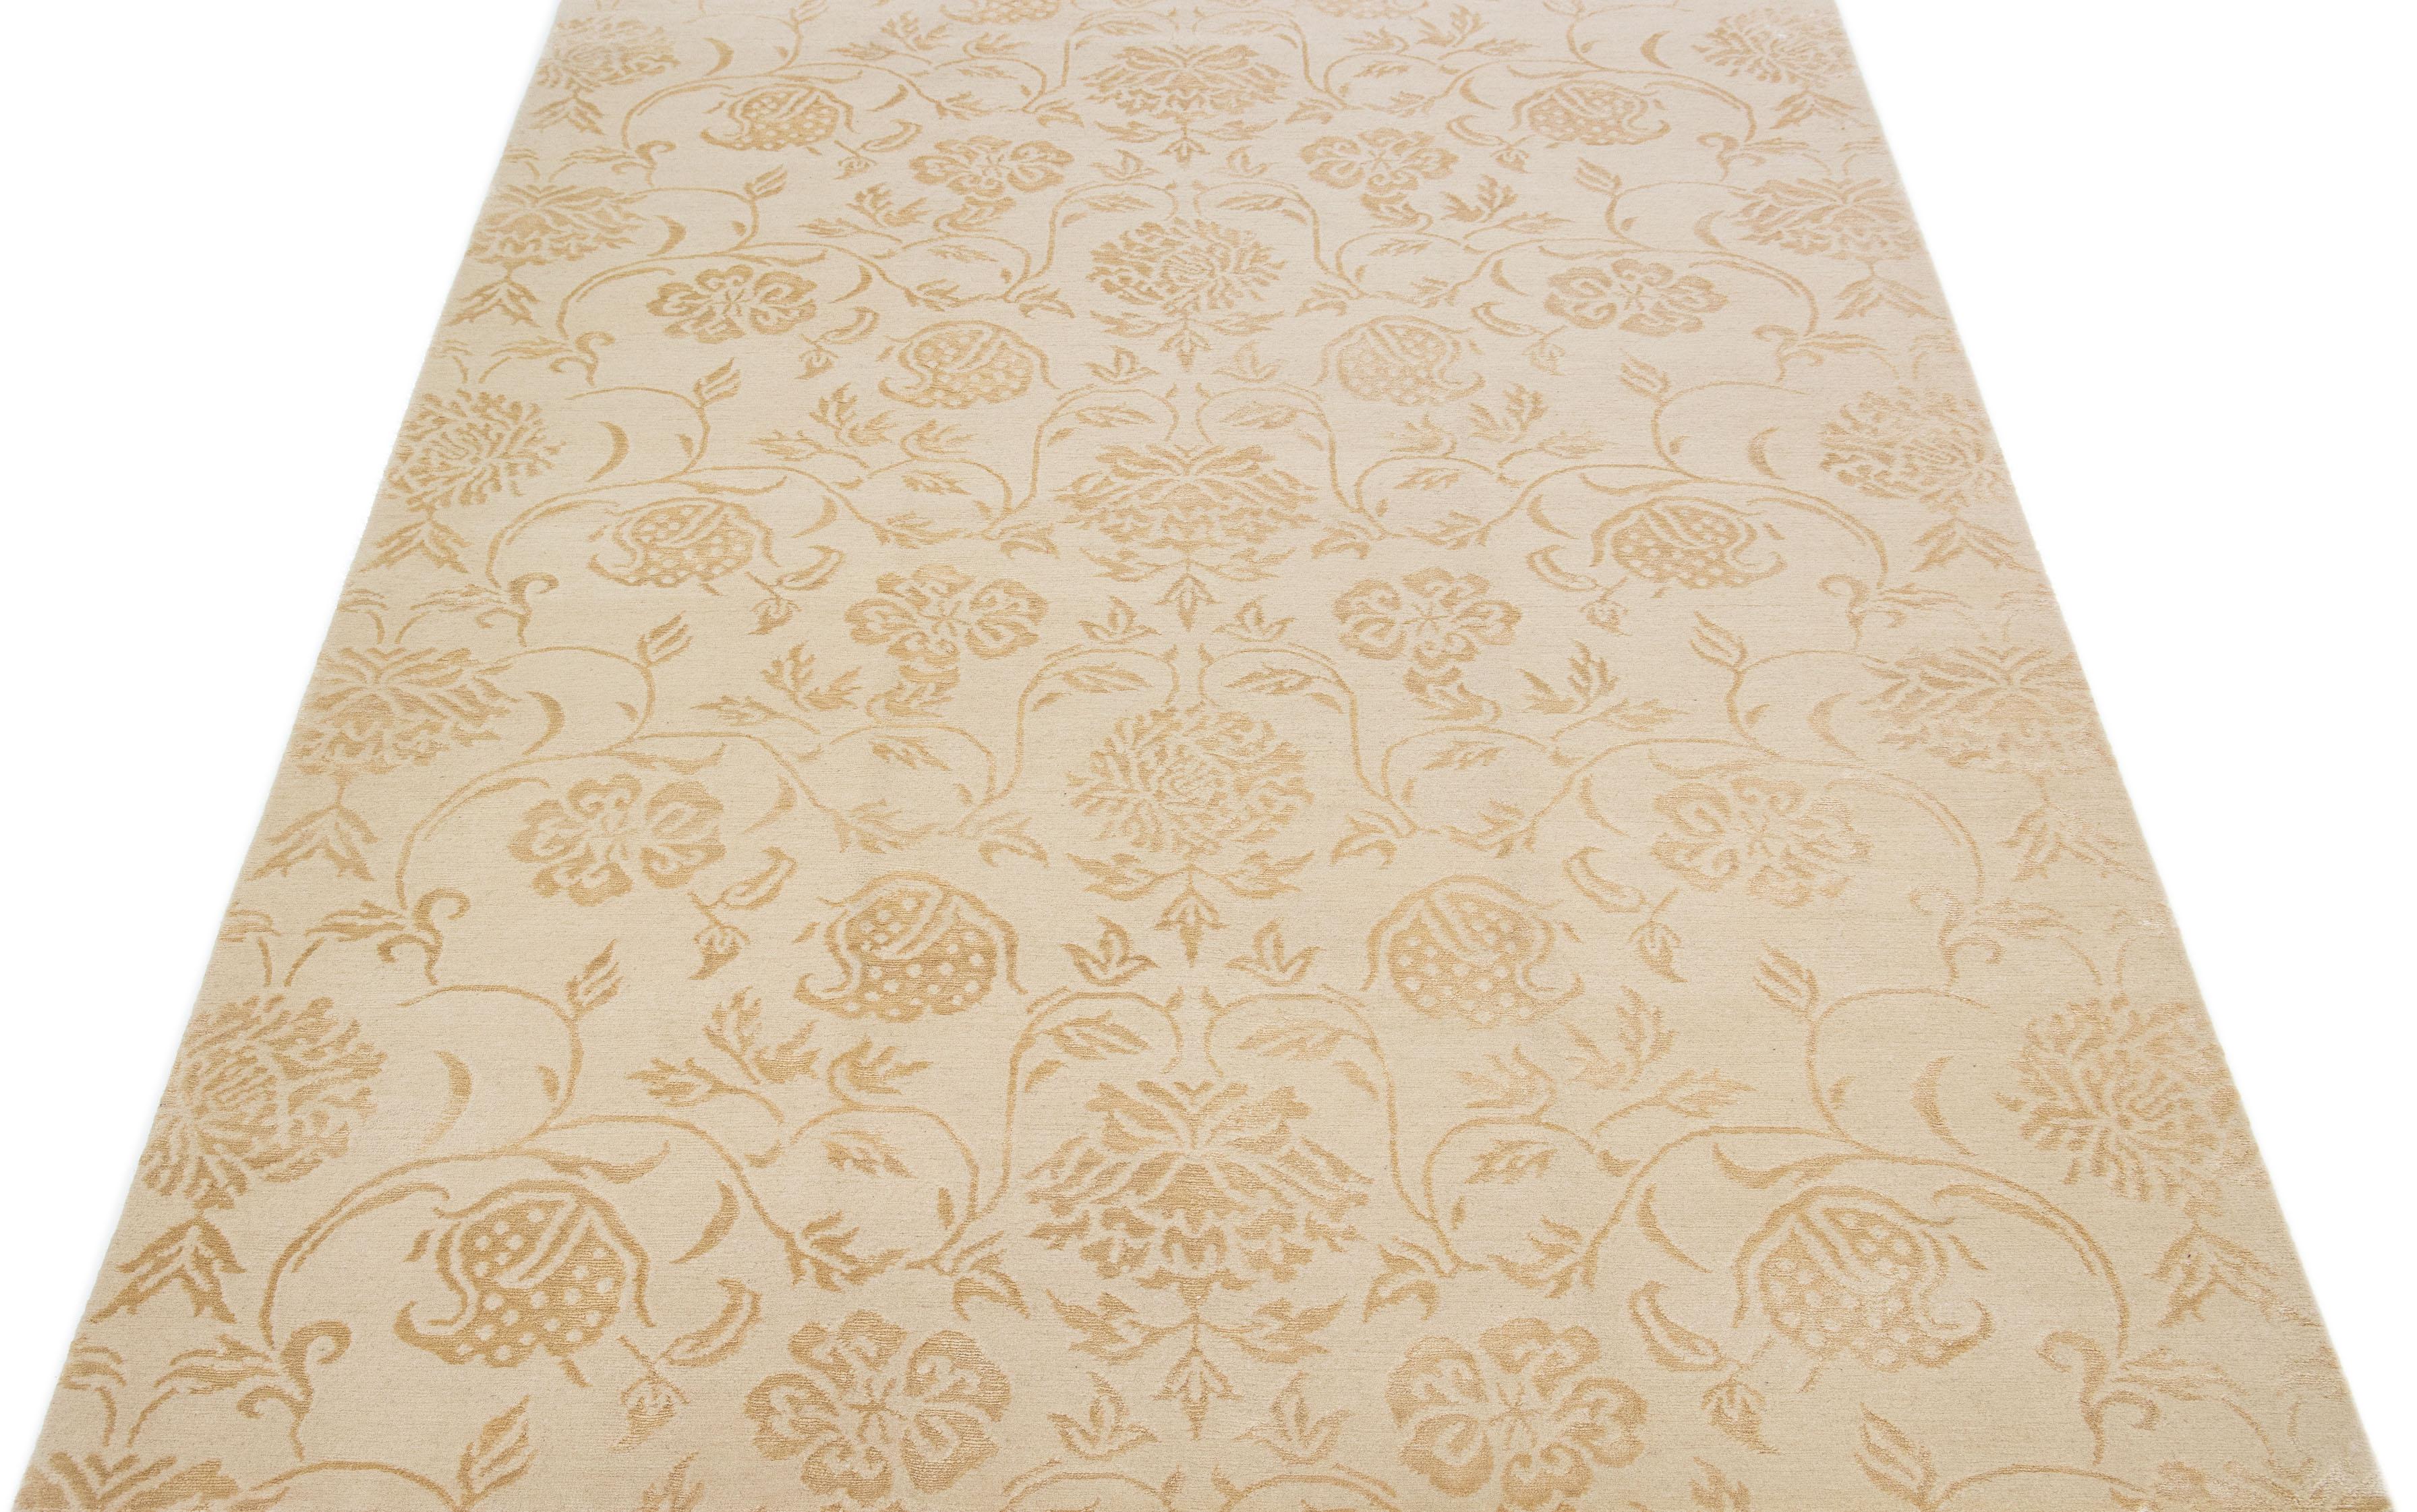 Crafted from premium quality wool and silk, this contemporary Nepalese rug features an intricate all-over scroll floral design in stunning shades of rich beige, beautifully accentuated by luxurious golden details.

This rug measures 6' x 9'1